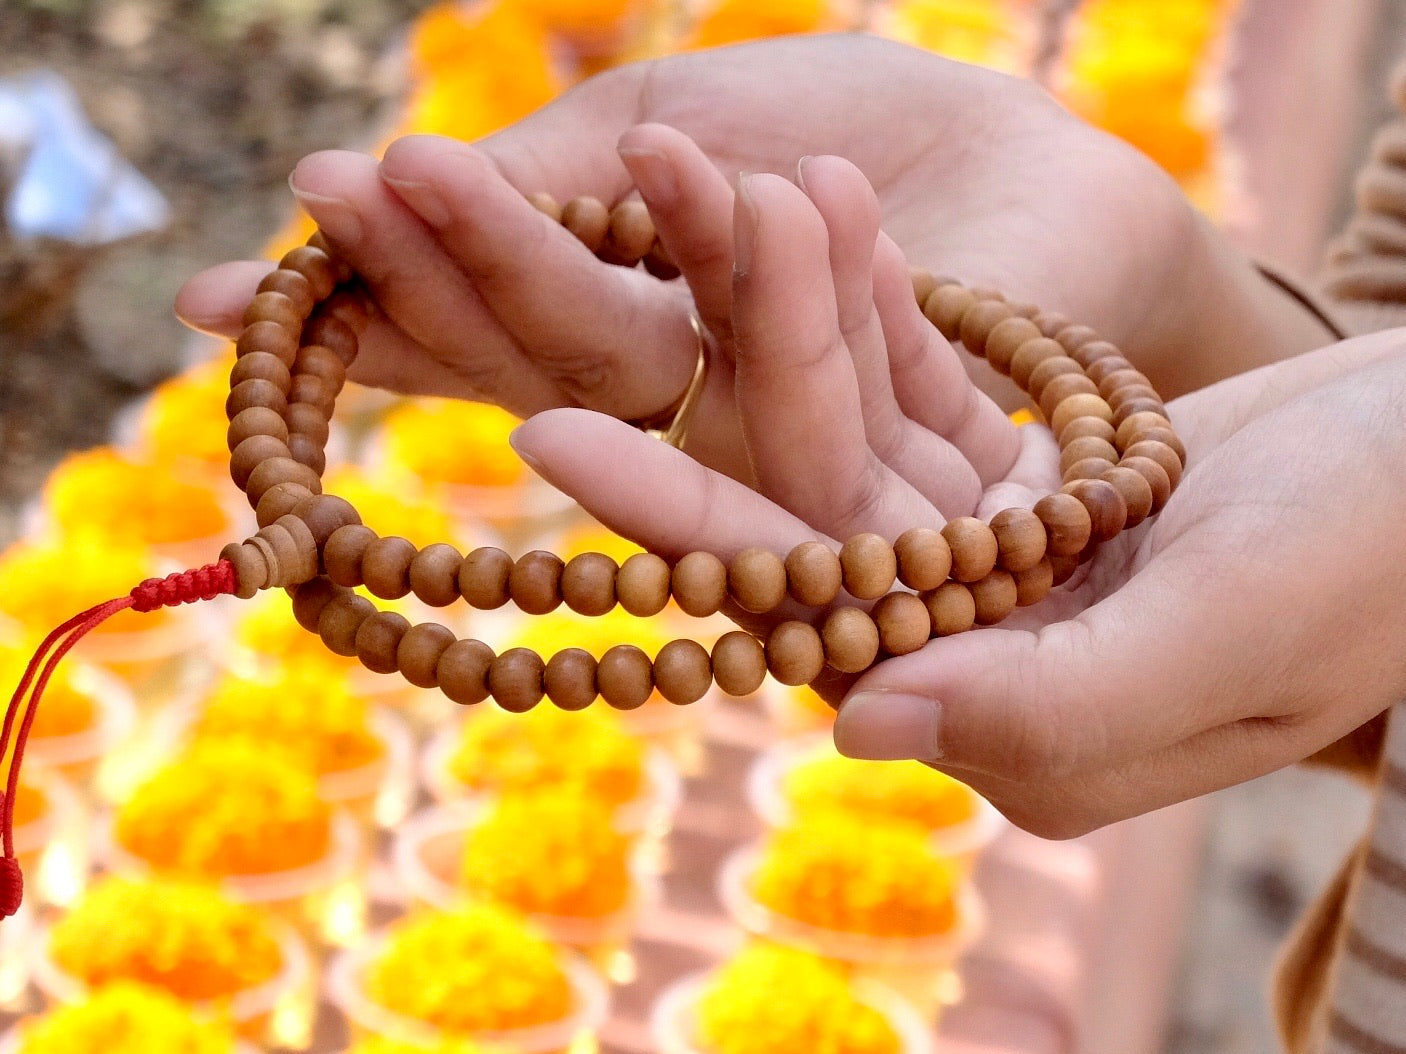 sandalwood mala beads with red cord being held in hand 